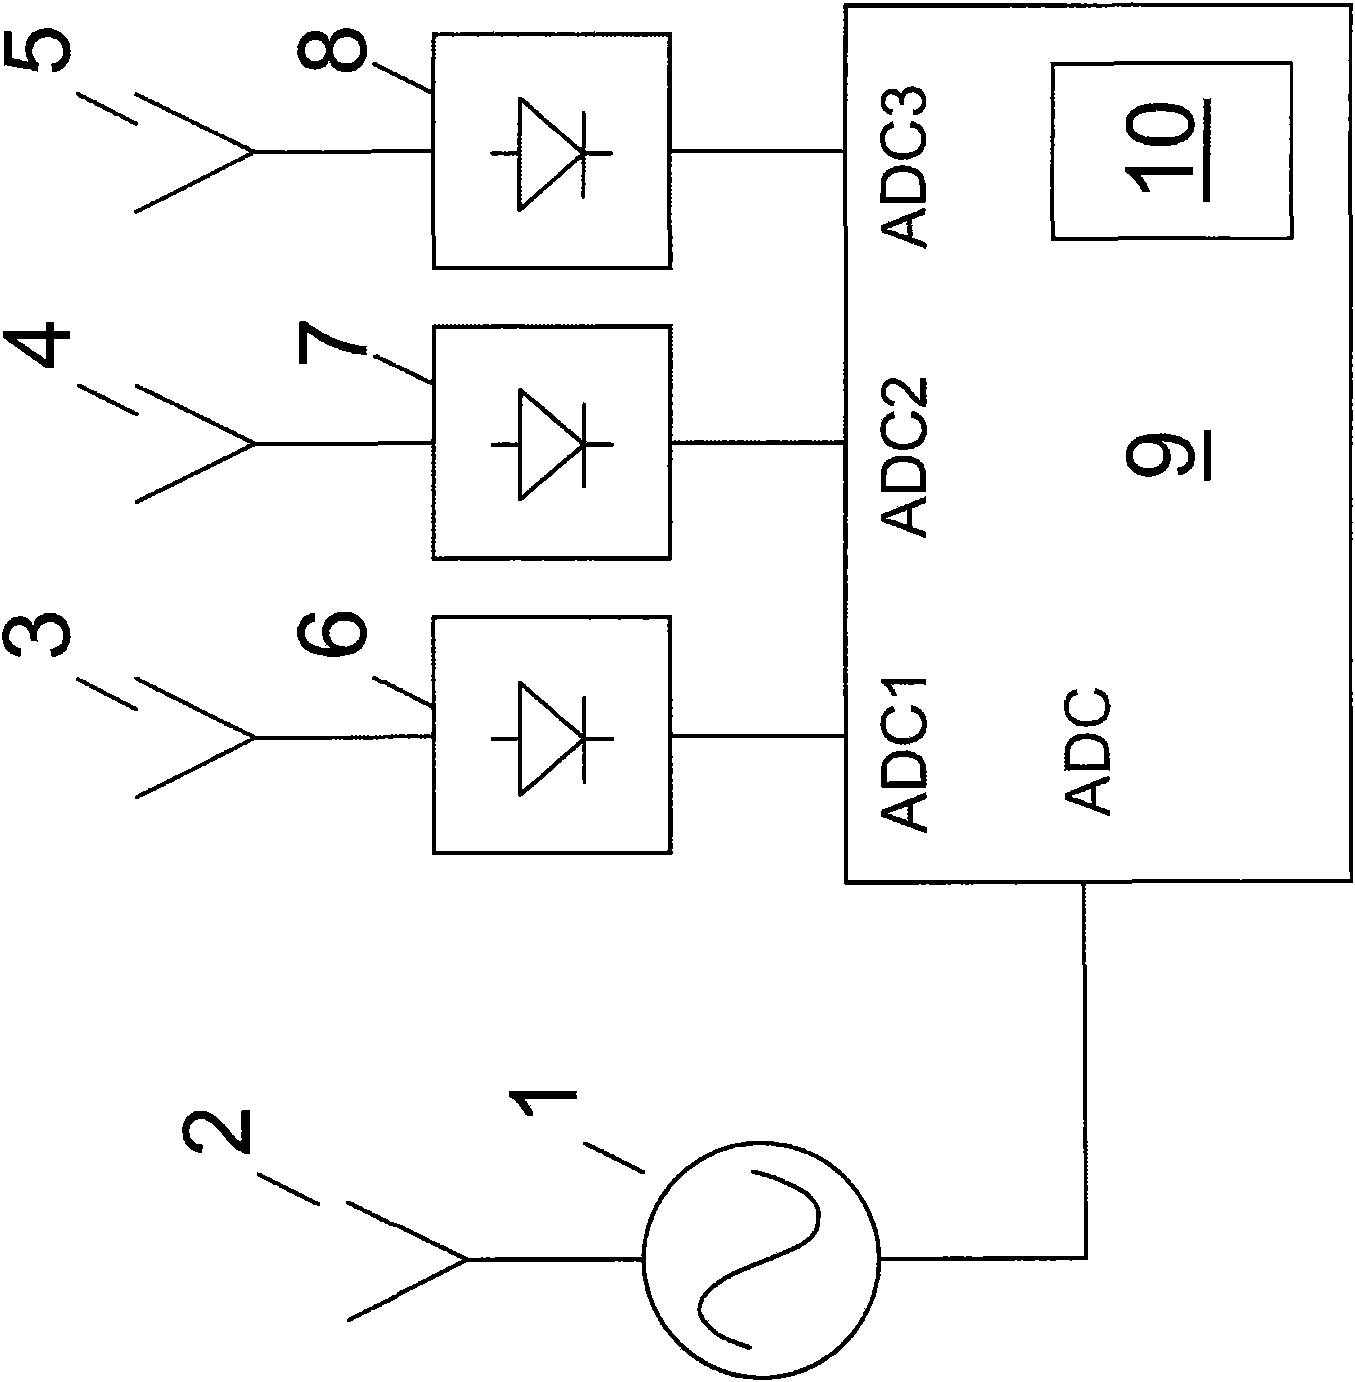 Apparatus for detecting the presence of skin